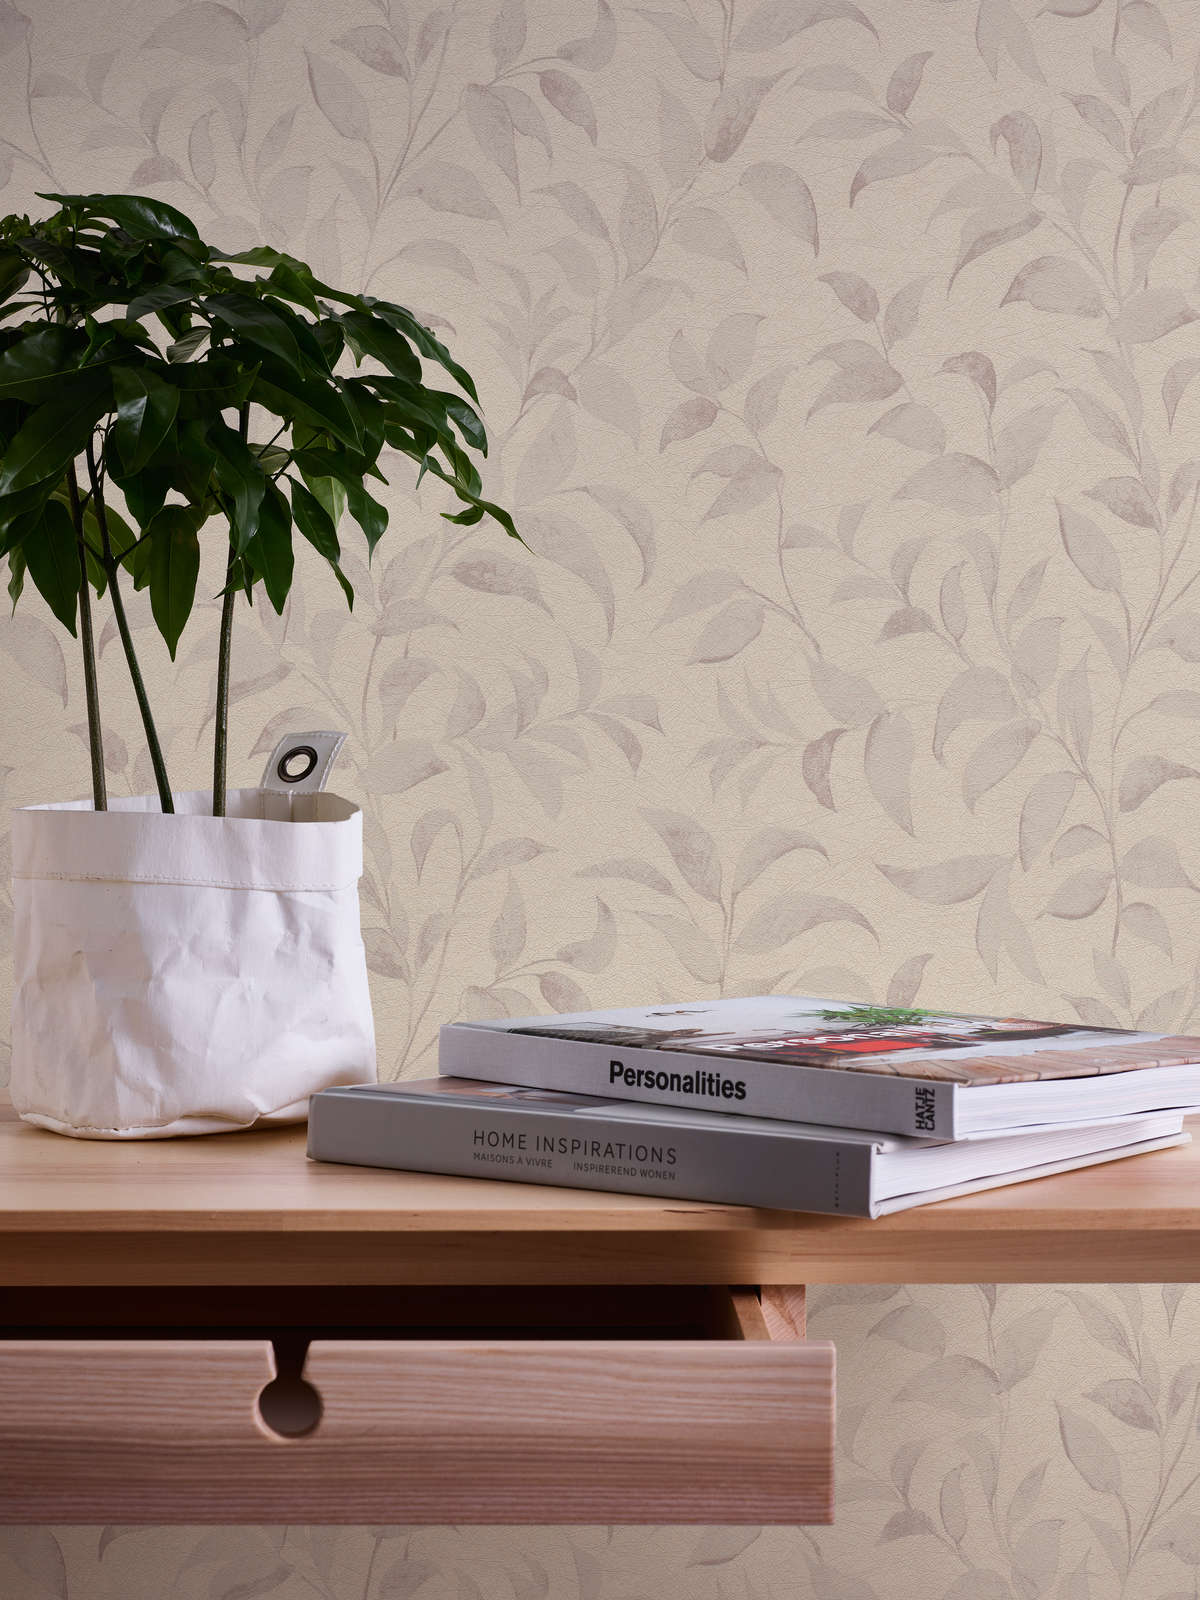             Floral wallpaper with leaves shimmering textured - grey, silver
        